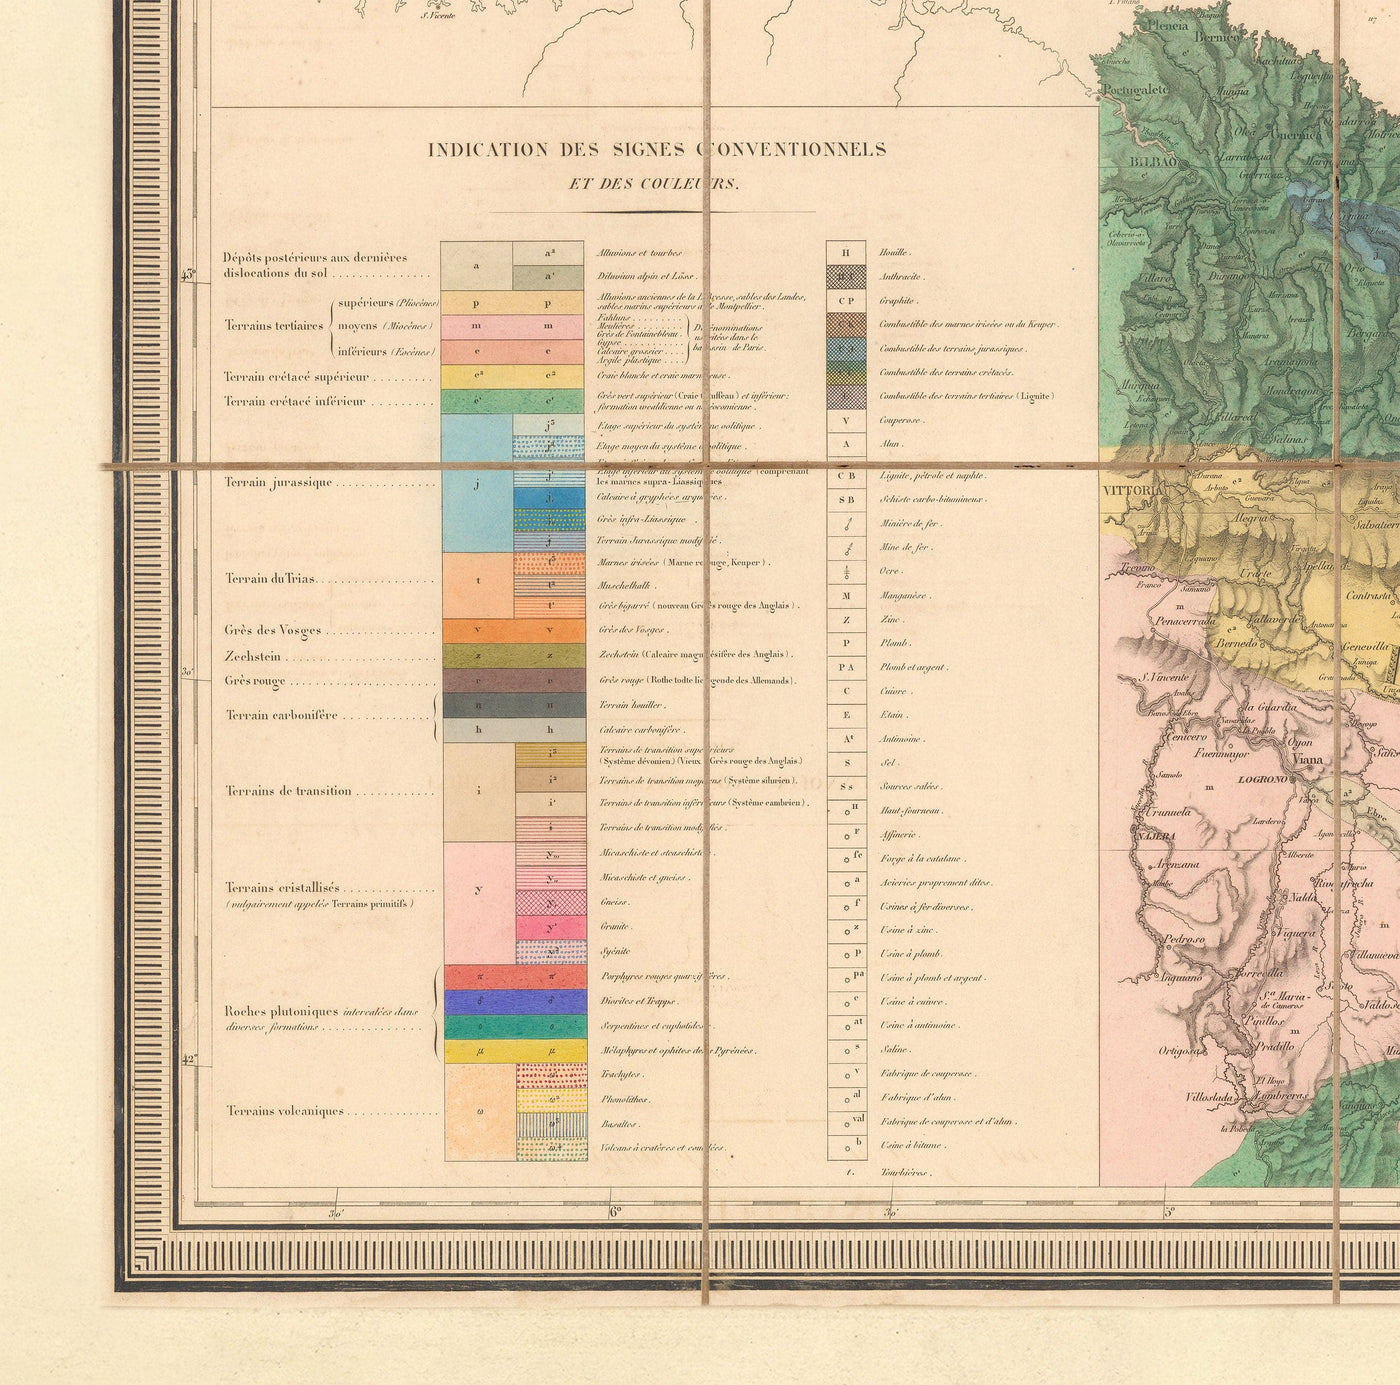 Old Geological Map of France, 1840 by André Brochant de Villiers - Western Europe, Belgium